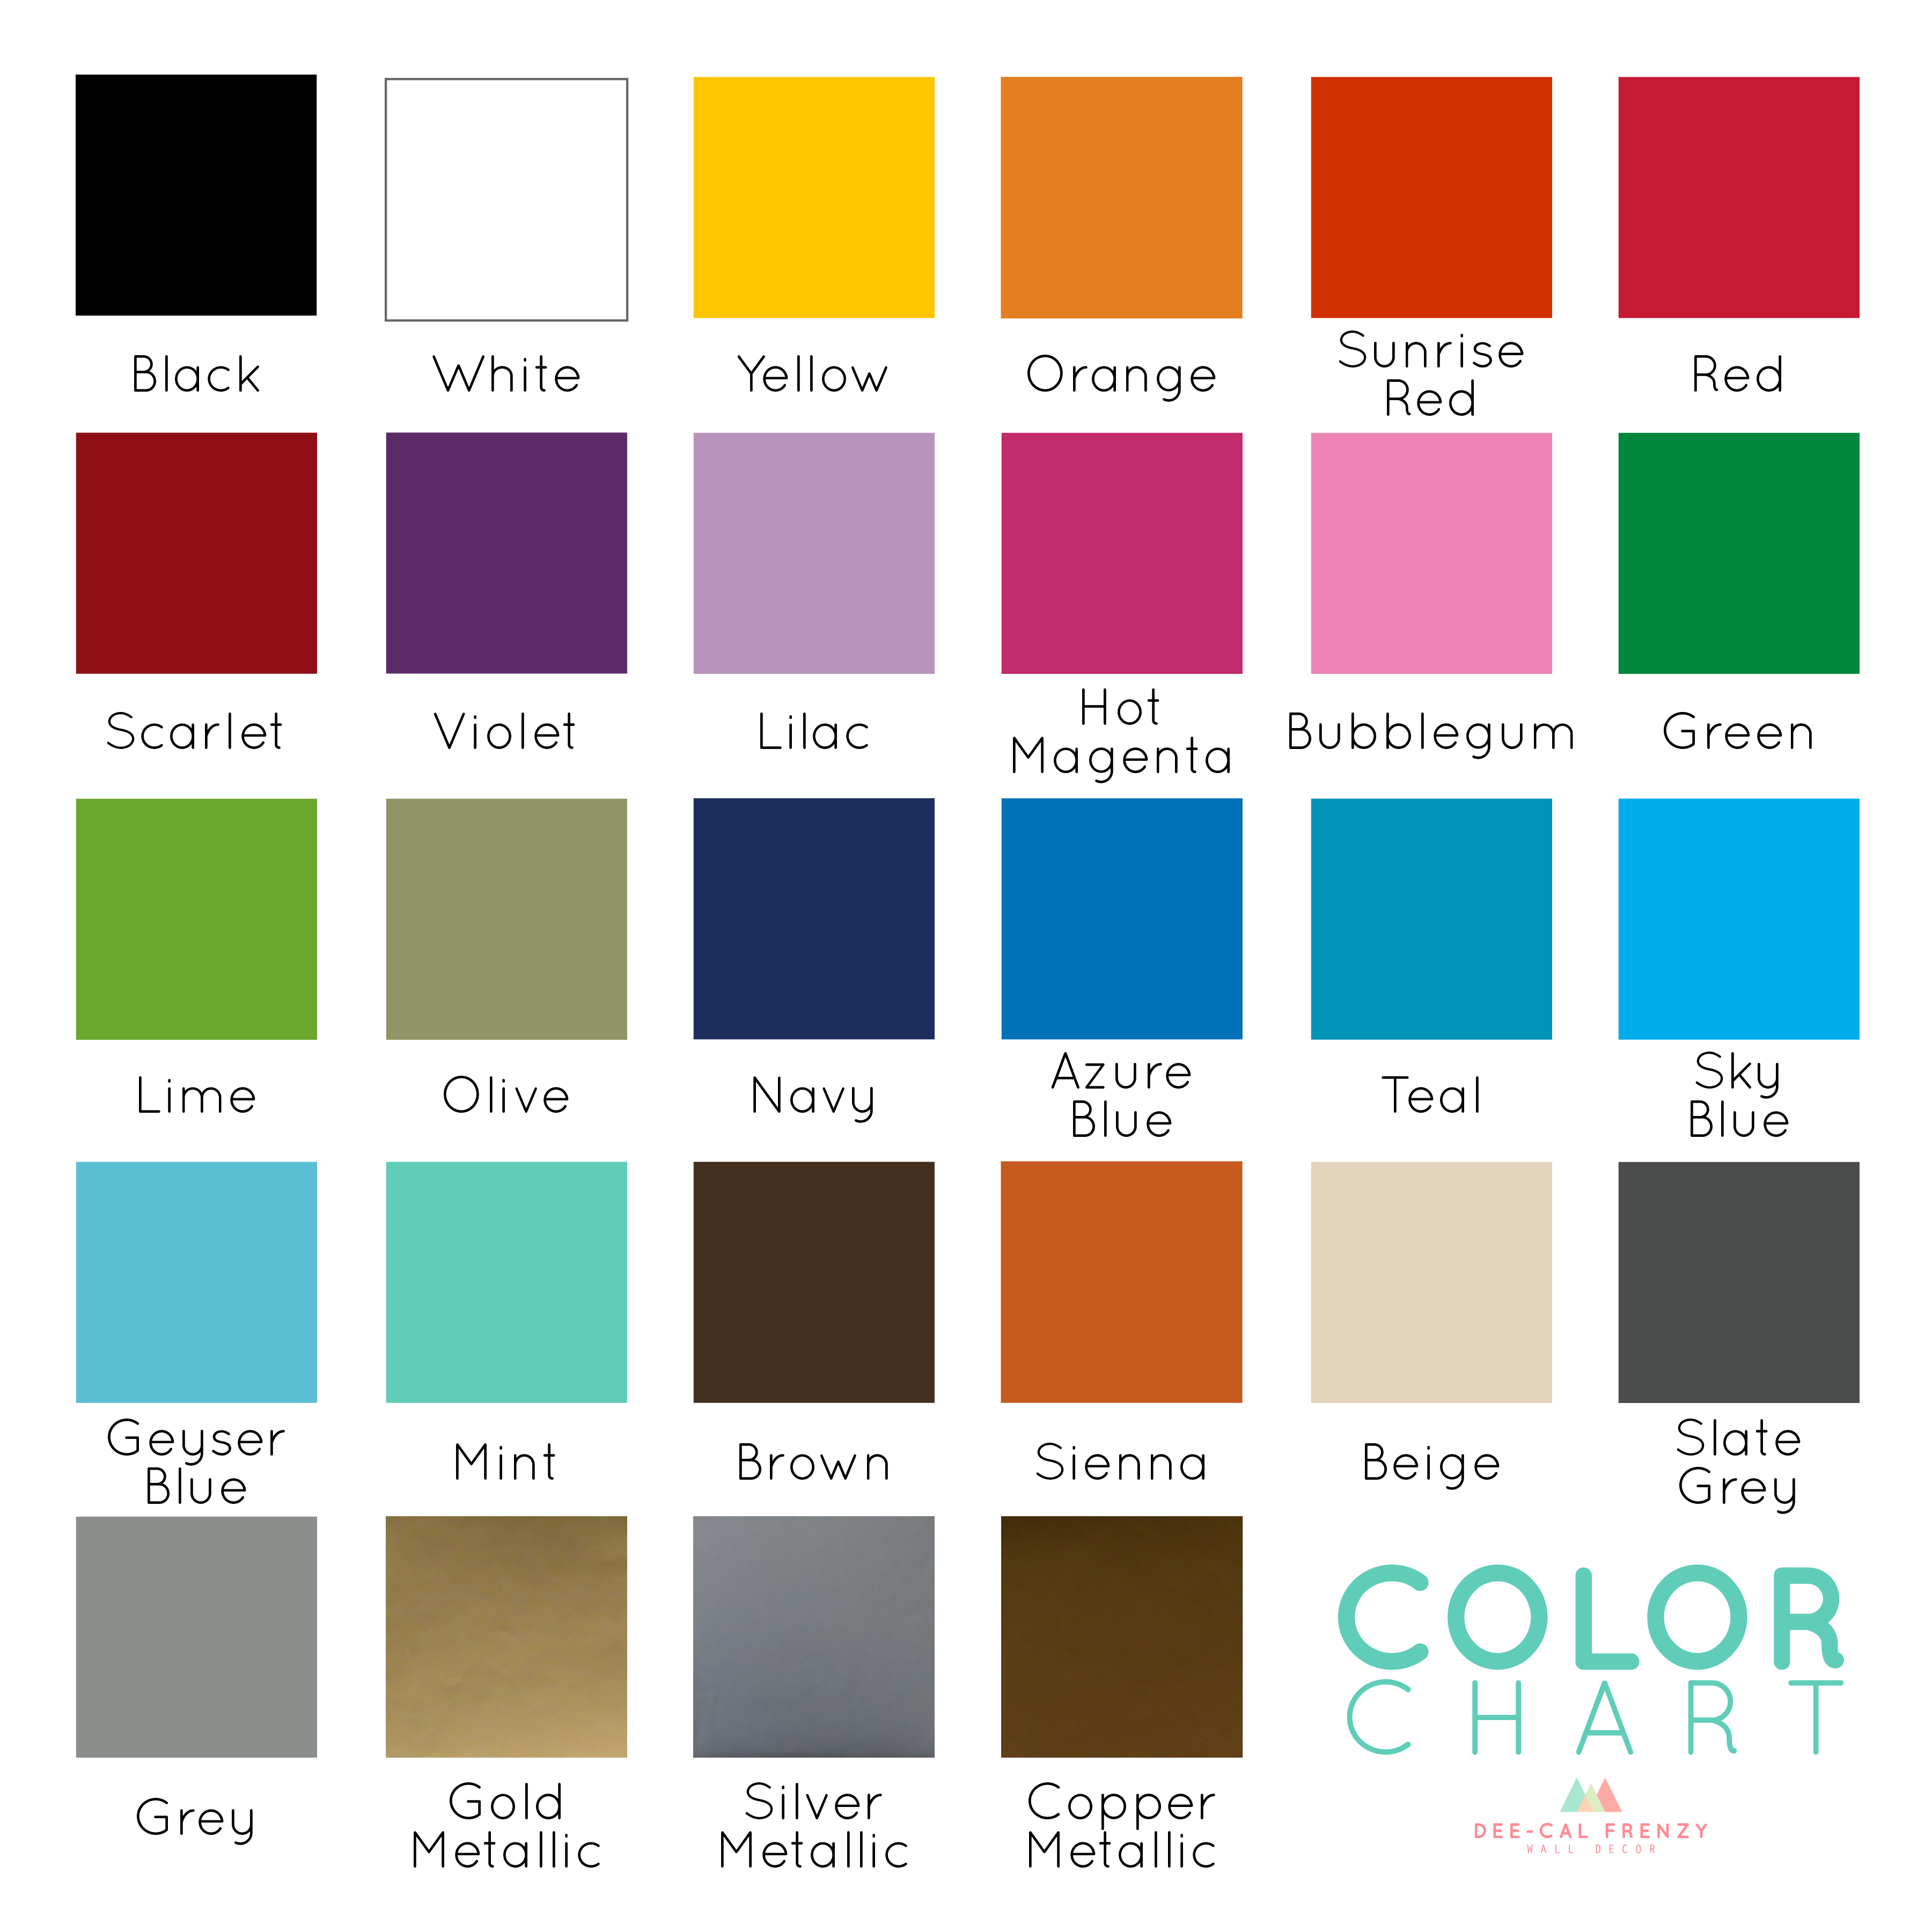 Color Chart Samples Dee Cal Frenzy Wall Decor Coloring Wallpapers Download Free Images Wallpaper [coloring654.blogspot.com]